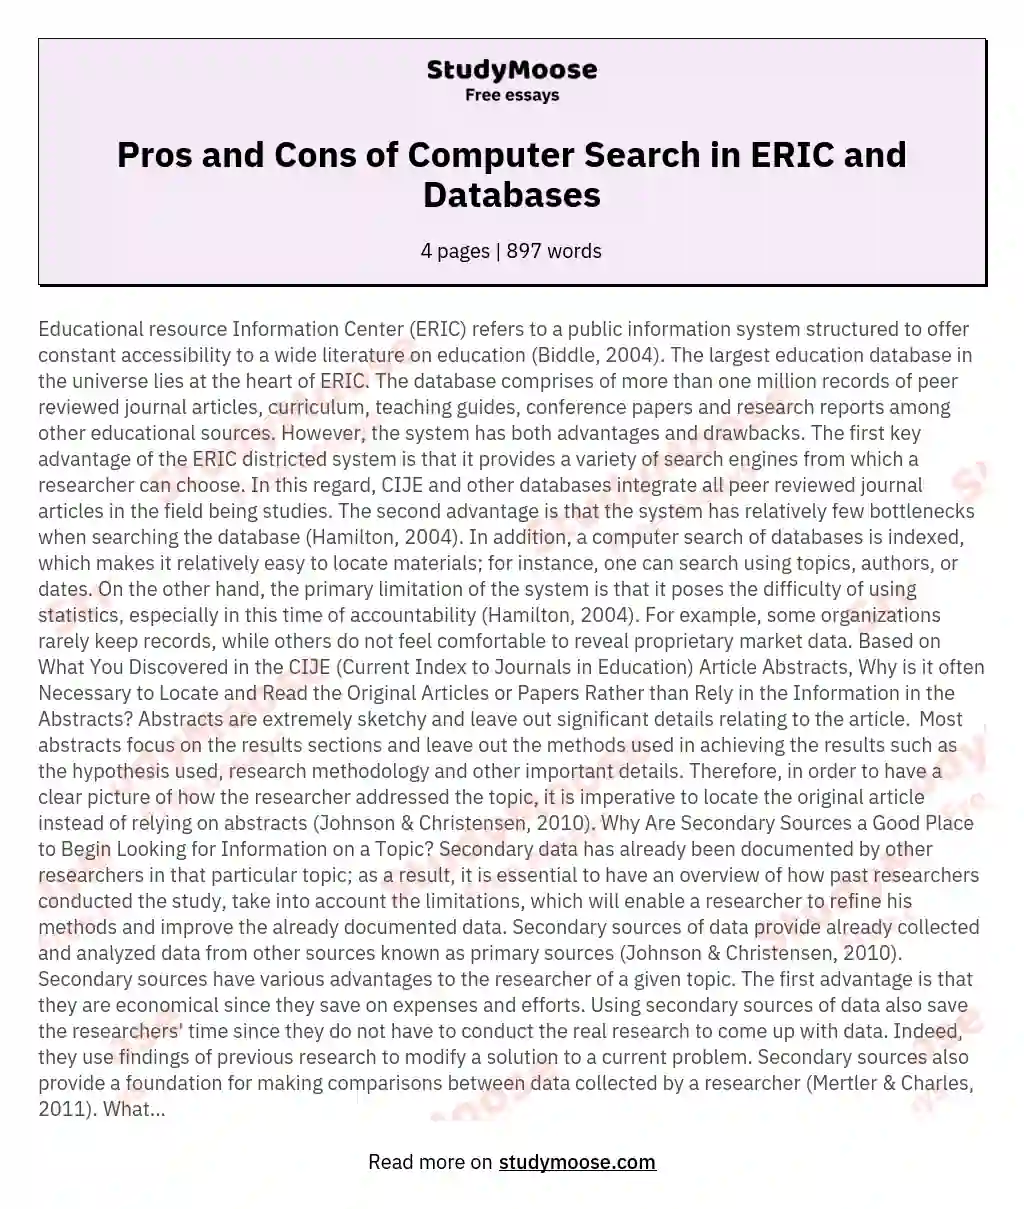 Pros and Cons of Computer Search in ERIC and Databases essay